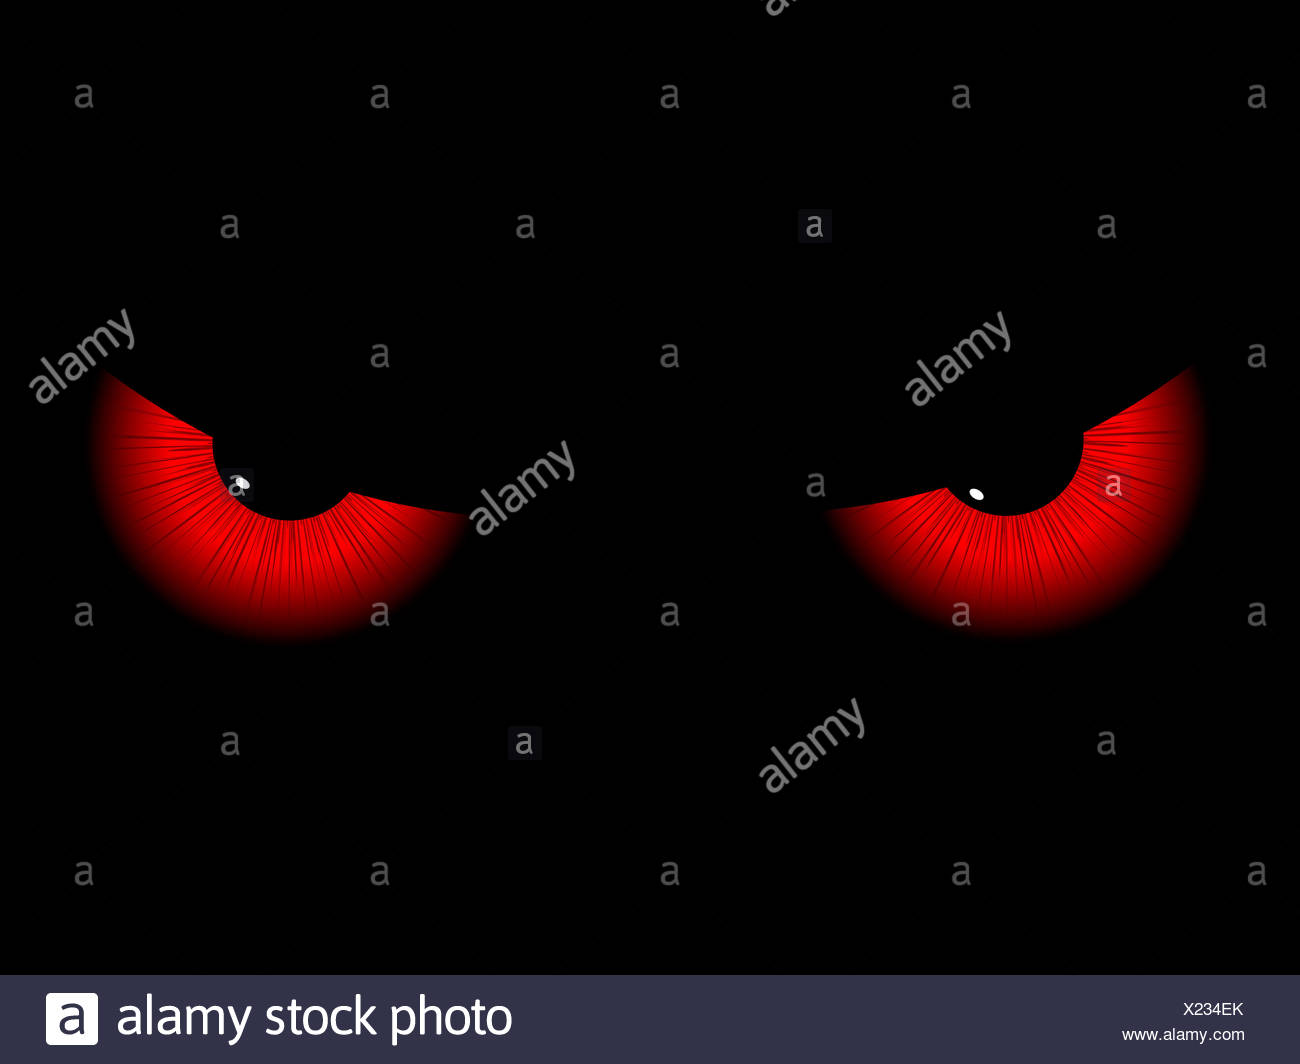 Red Evil Eyes On A Black Background Stock Photo